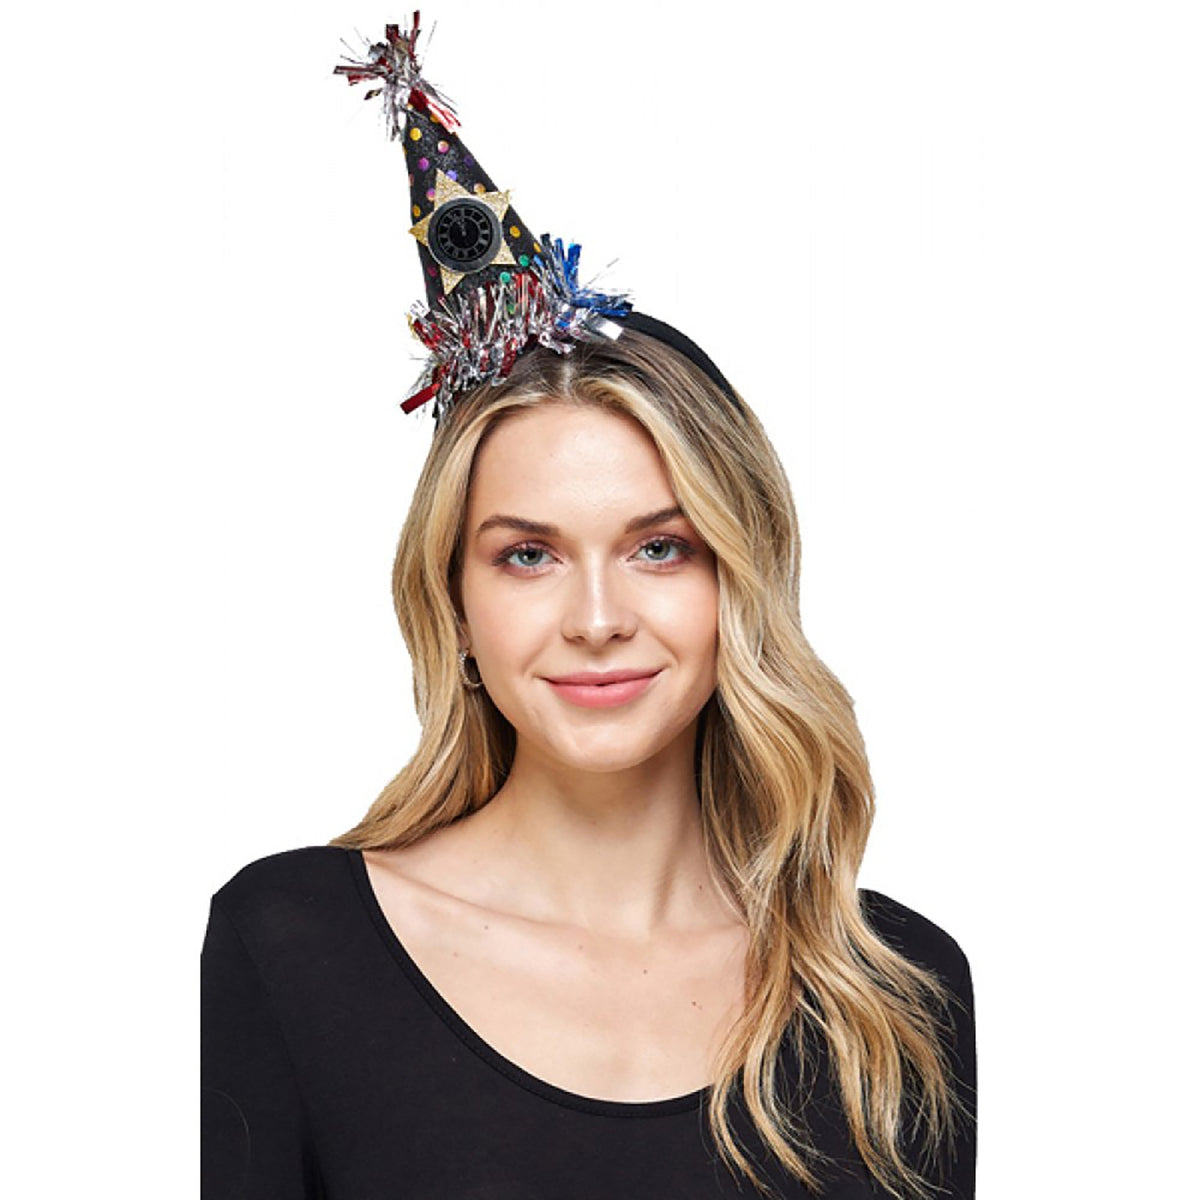 KBW GLOBAL CORP New Year Happy New Year Black Hat with Bow Headband, 1 Count